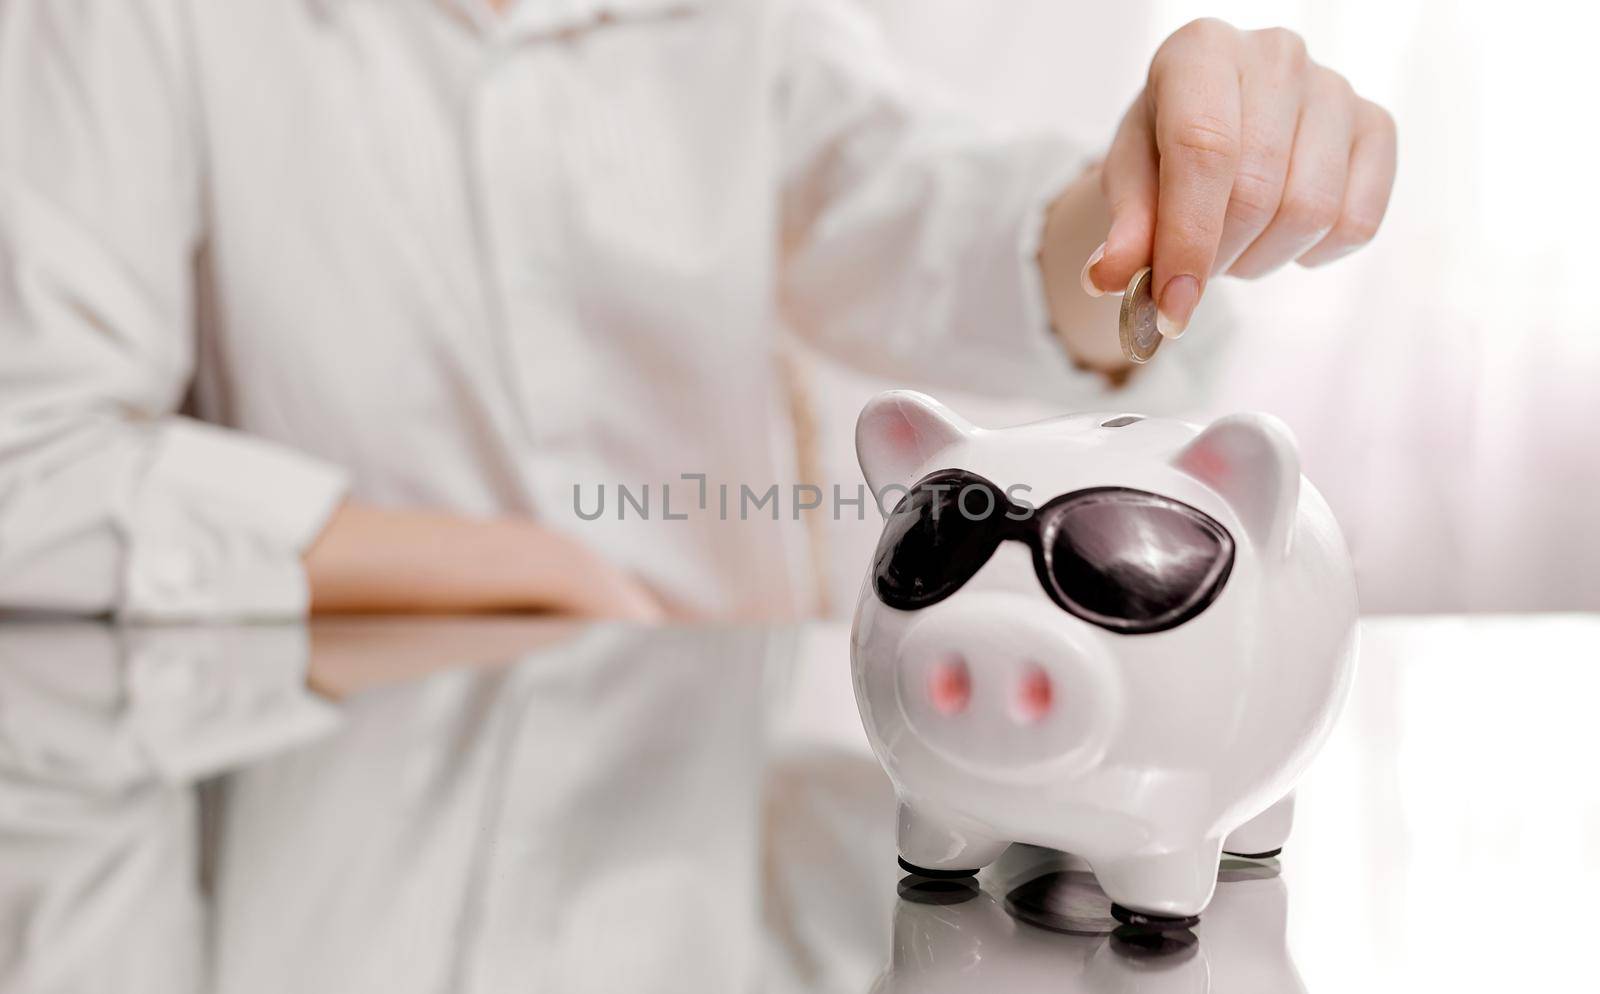 A woman puts a coin in a piggy bank on a mirrored table by AntonIlchanka